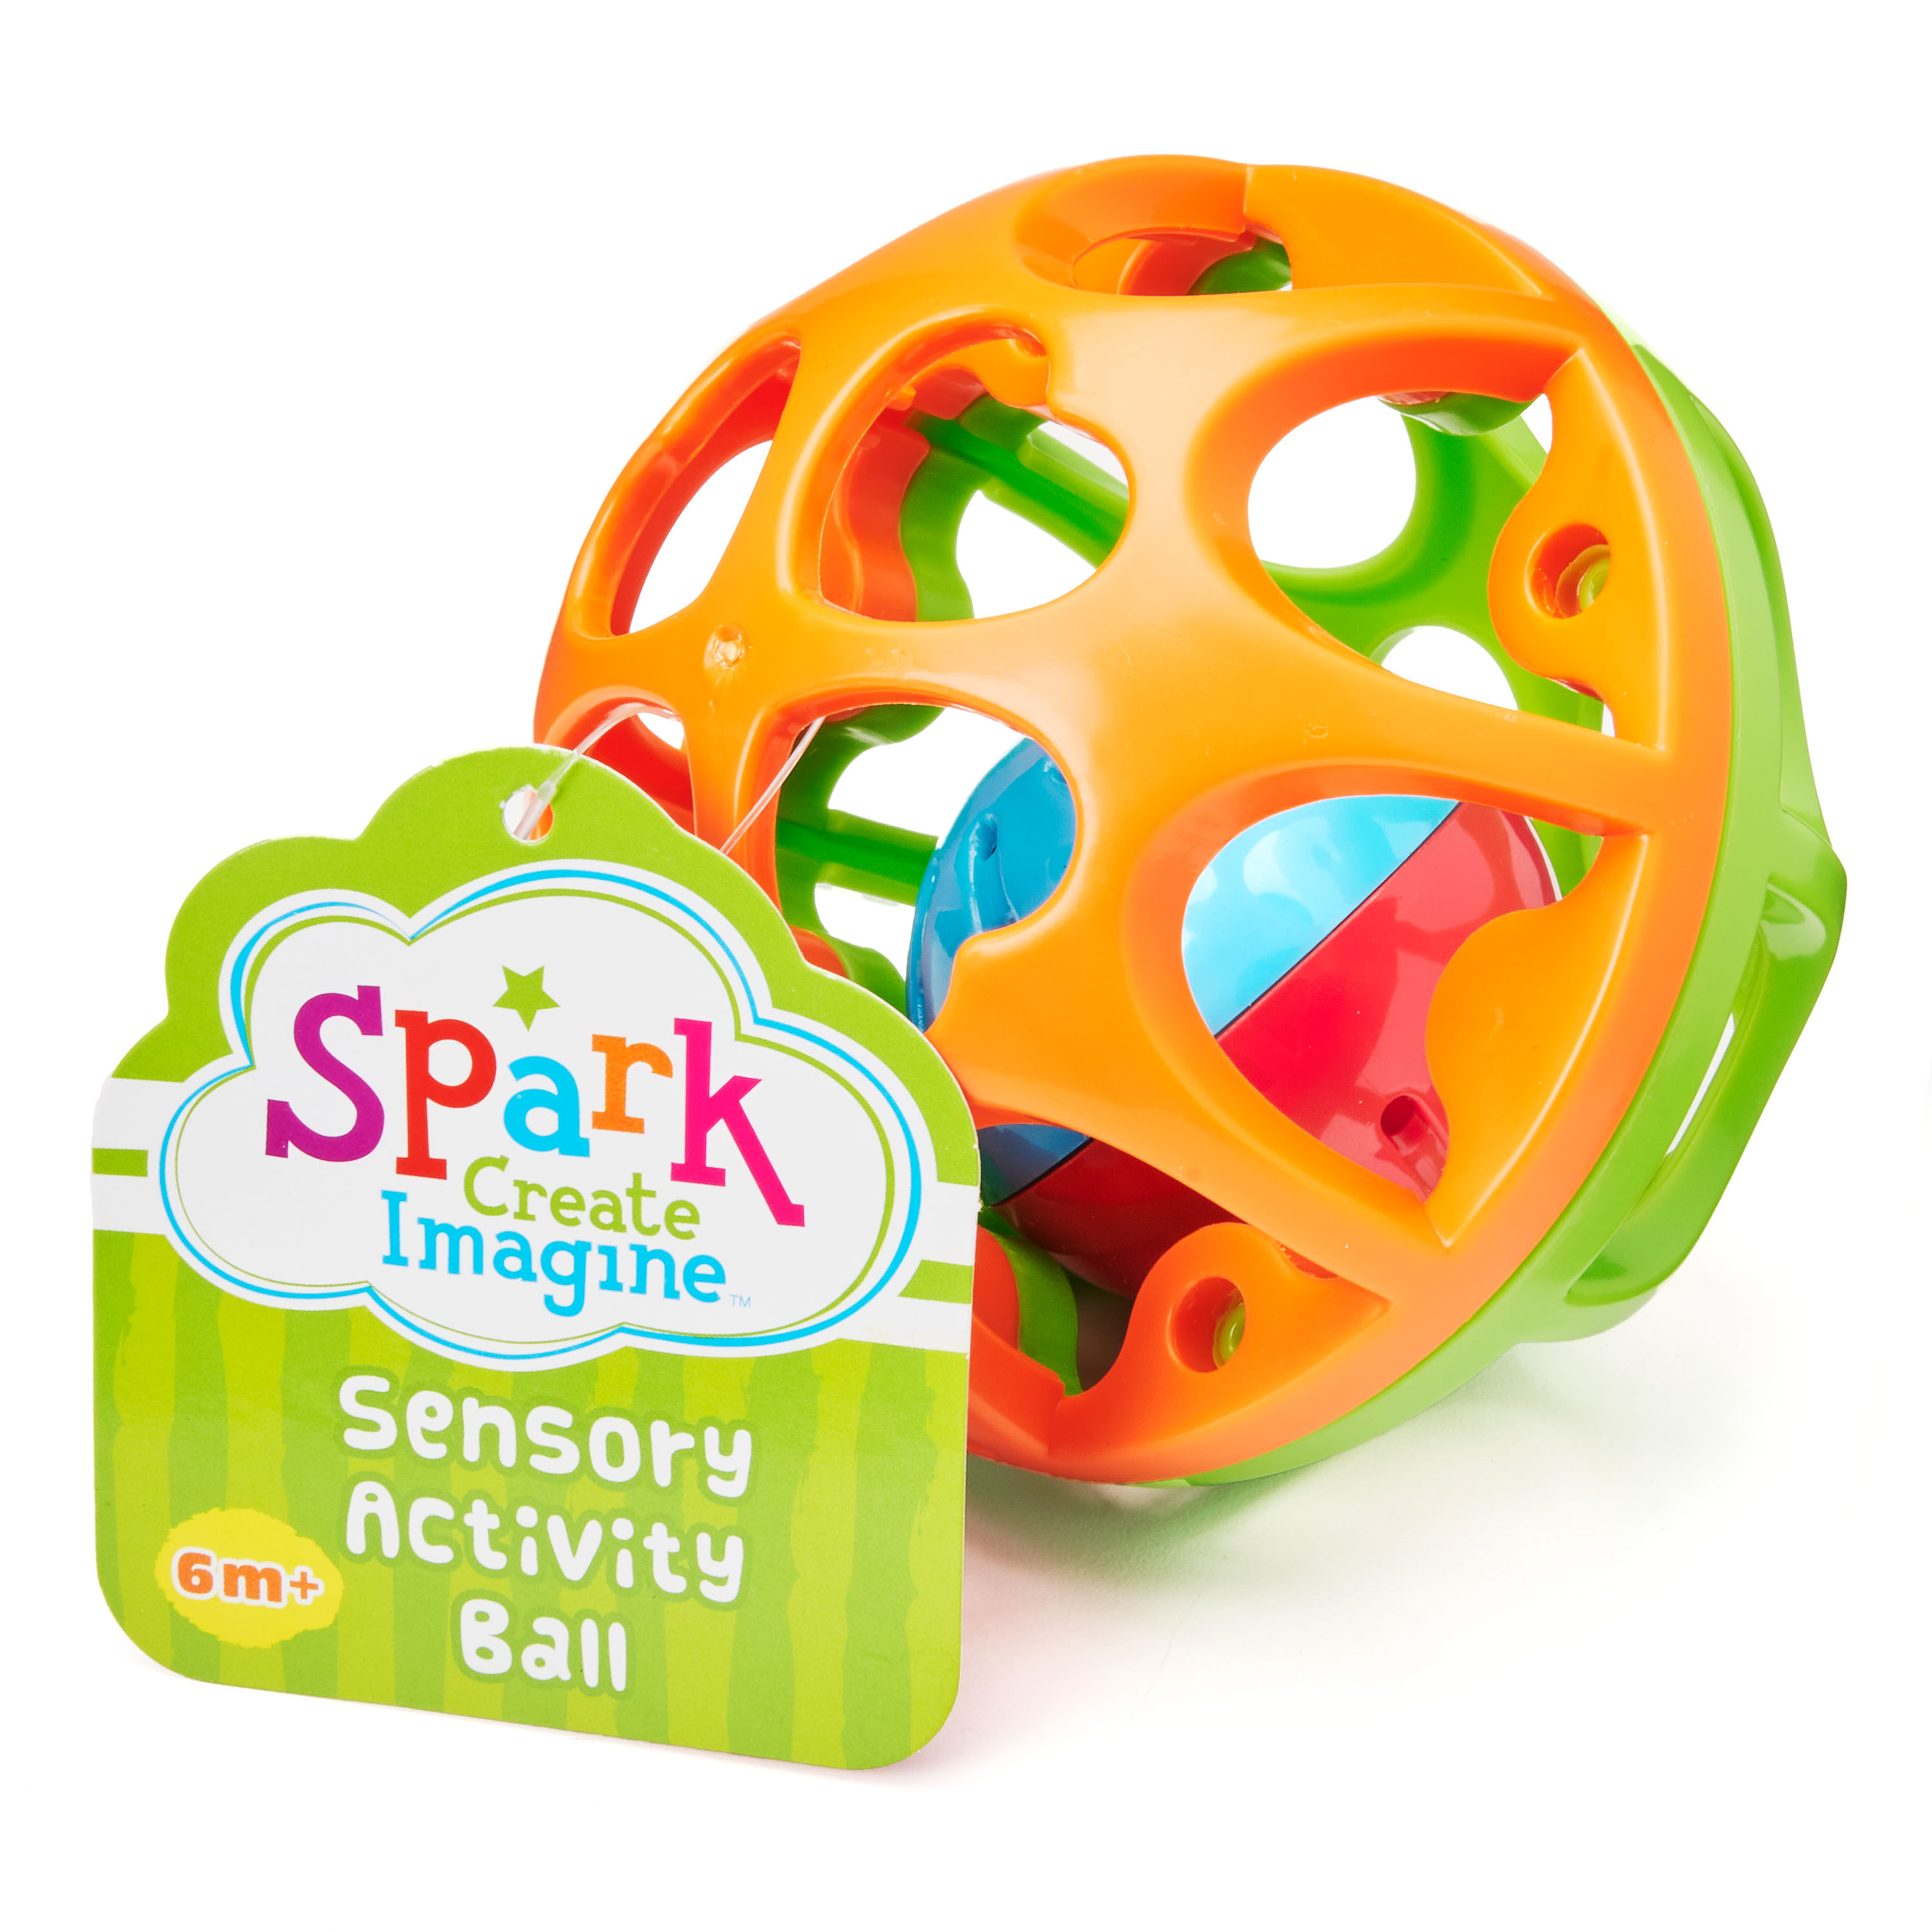 Spark. Create. Imagine. Sustainable Sensory Activity Play Ball, Assorted Colors - image 2 of 4